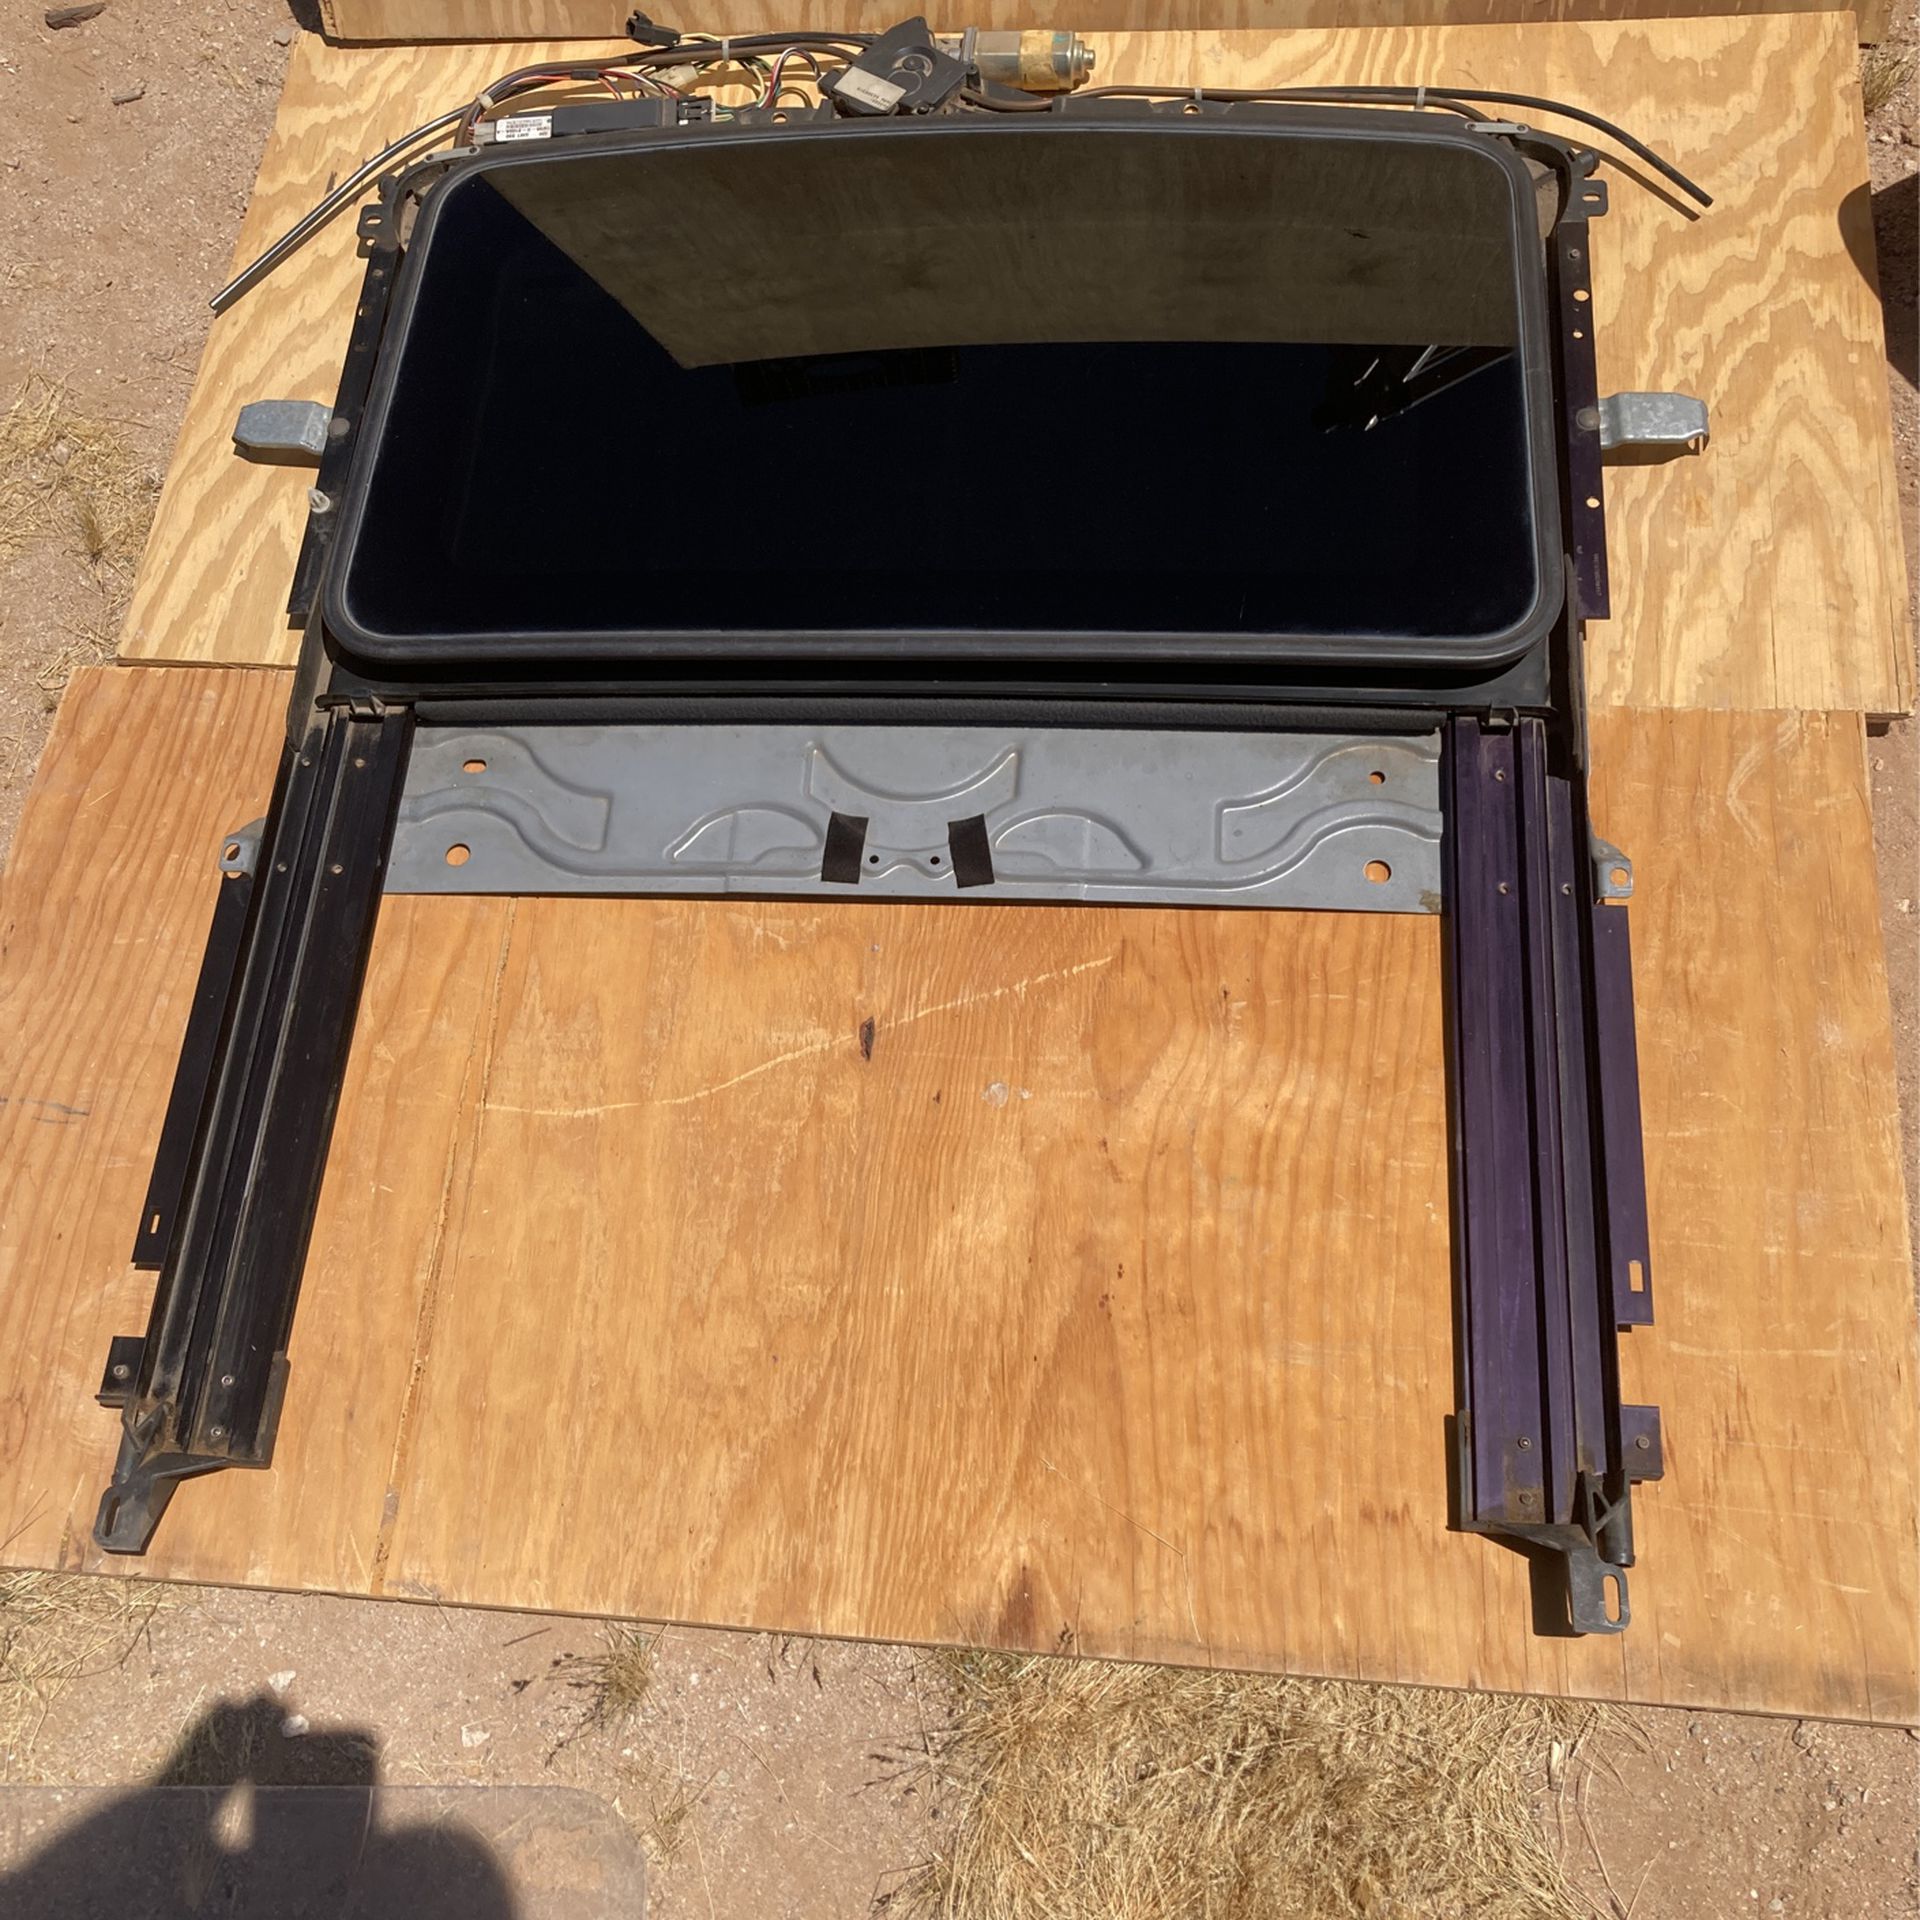 Complete Sunroof Unit I Believe It’s For A Chevy Trailblazer Or Similar Gmc Like New